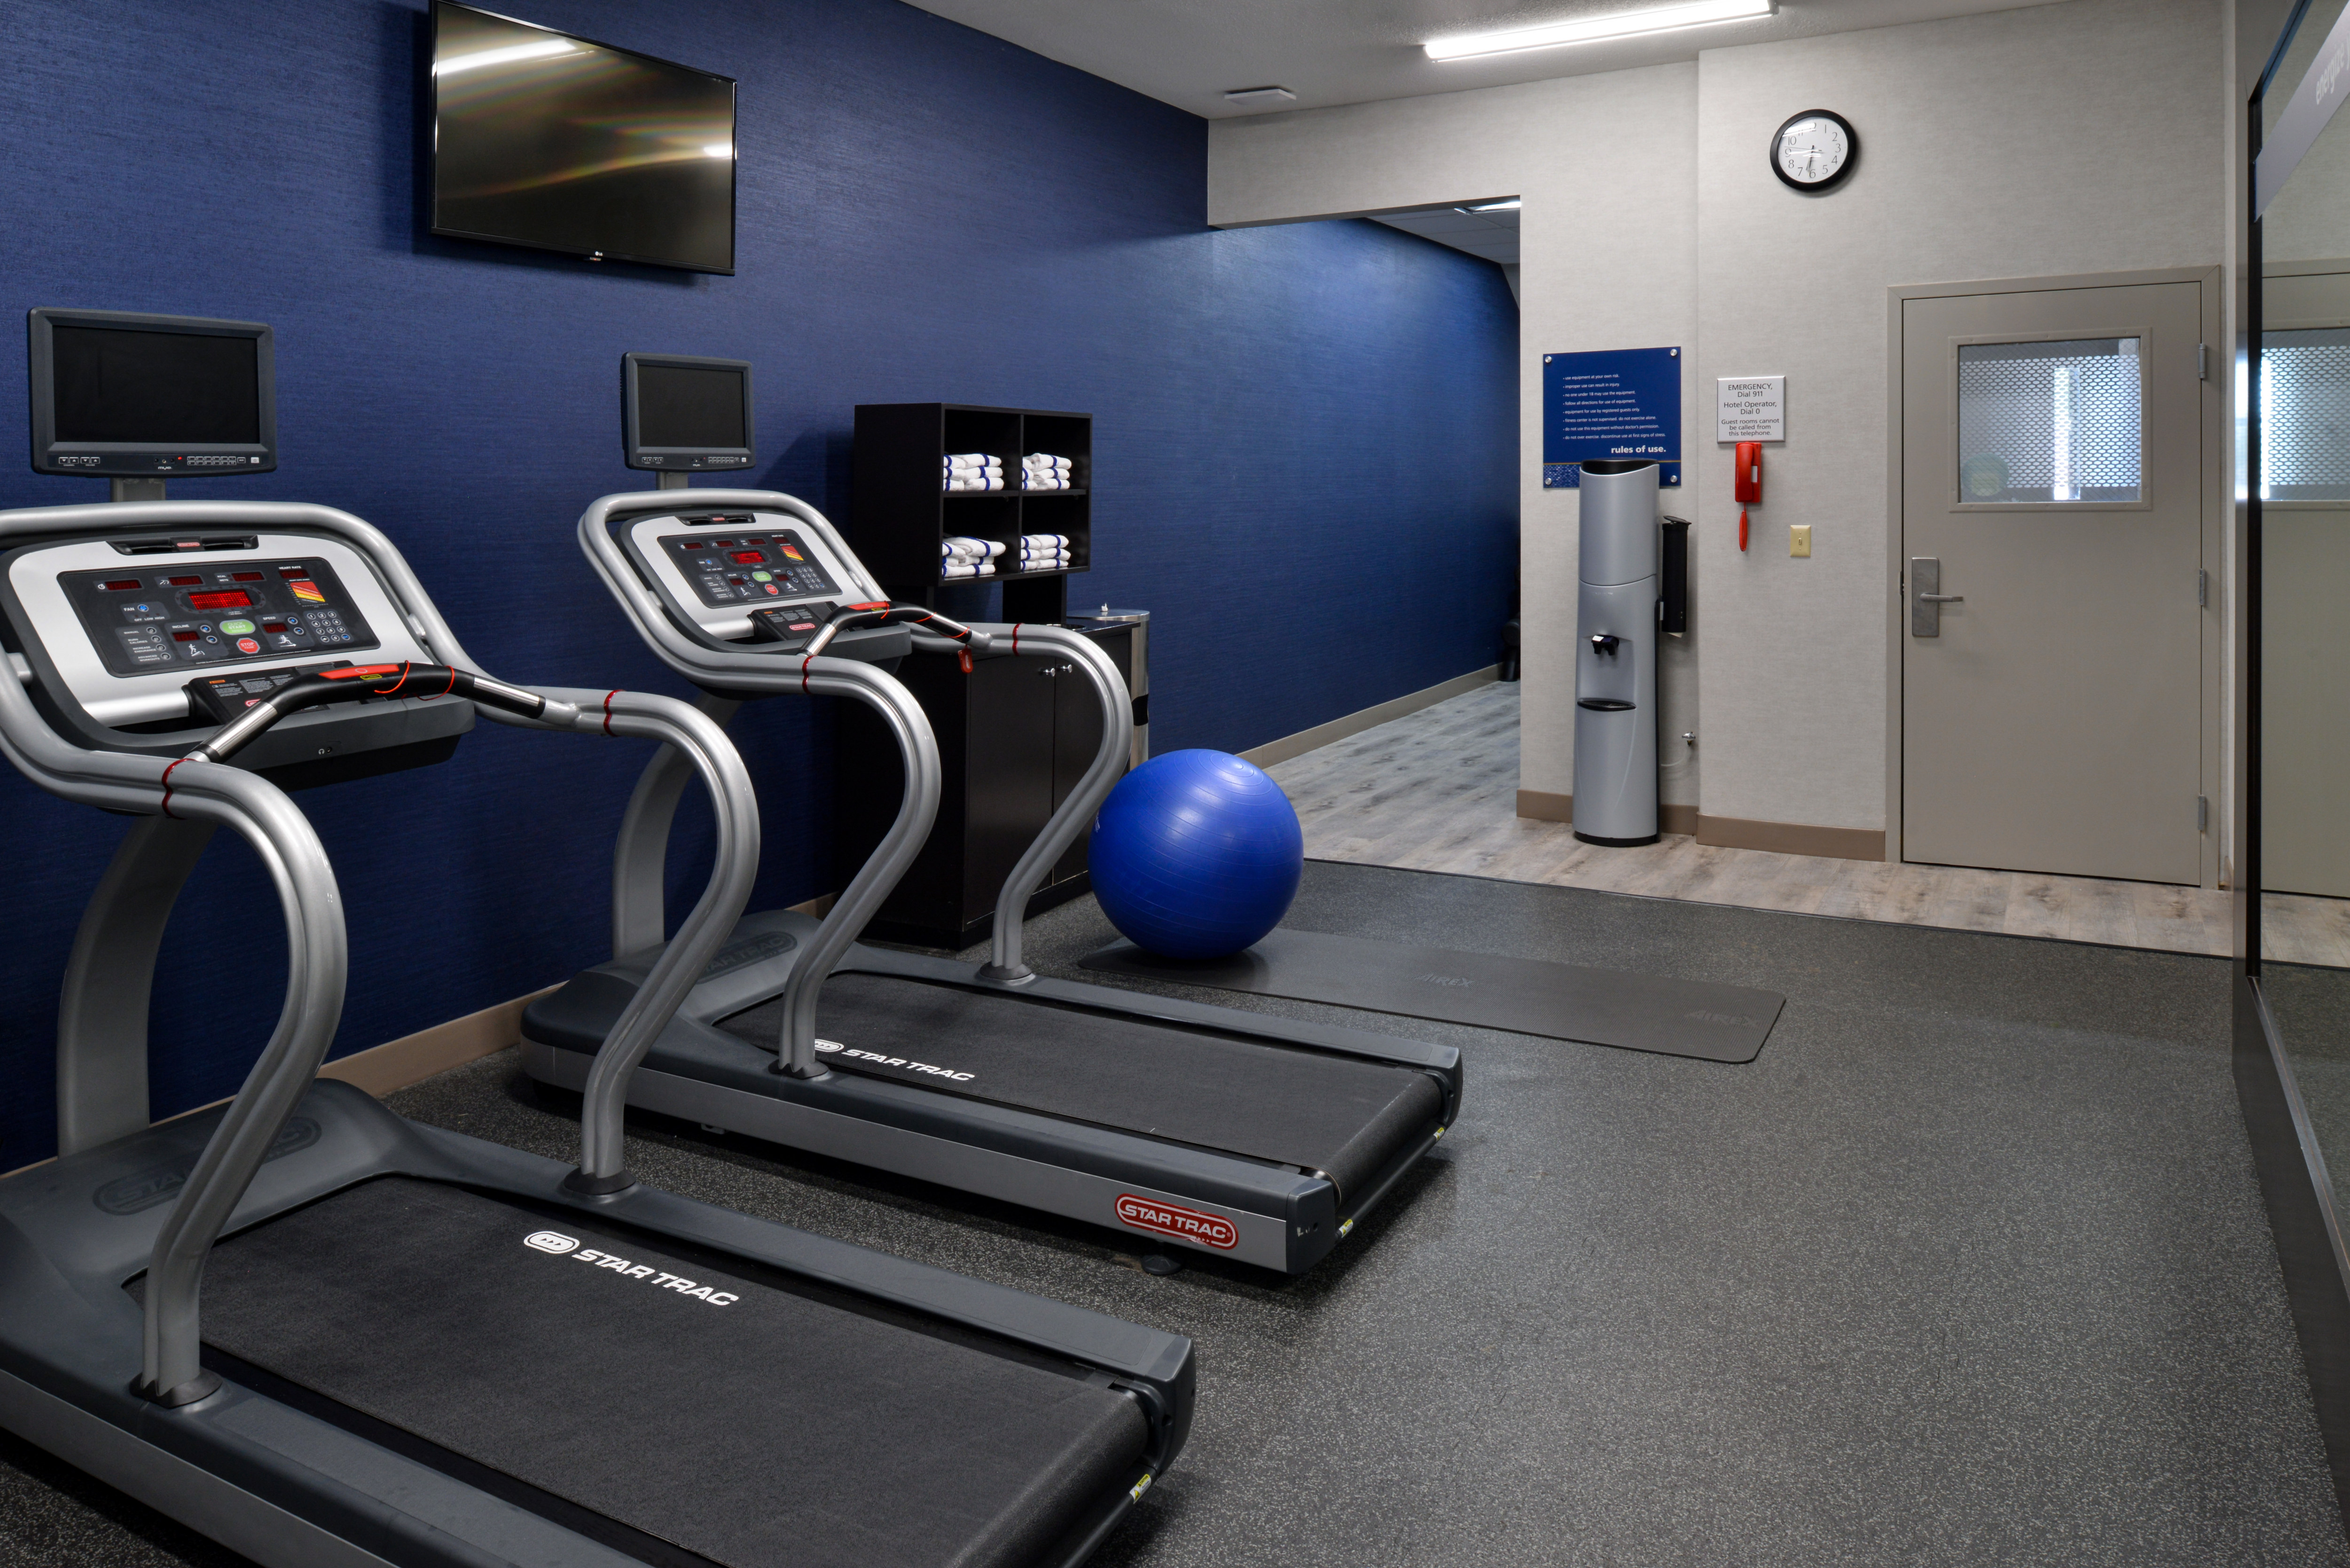 Fitness center with cardio machines and TV